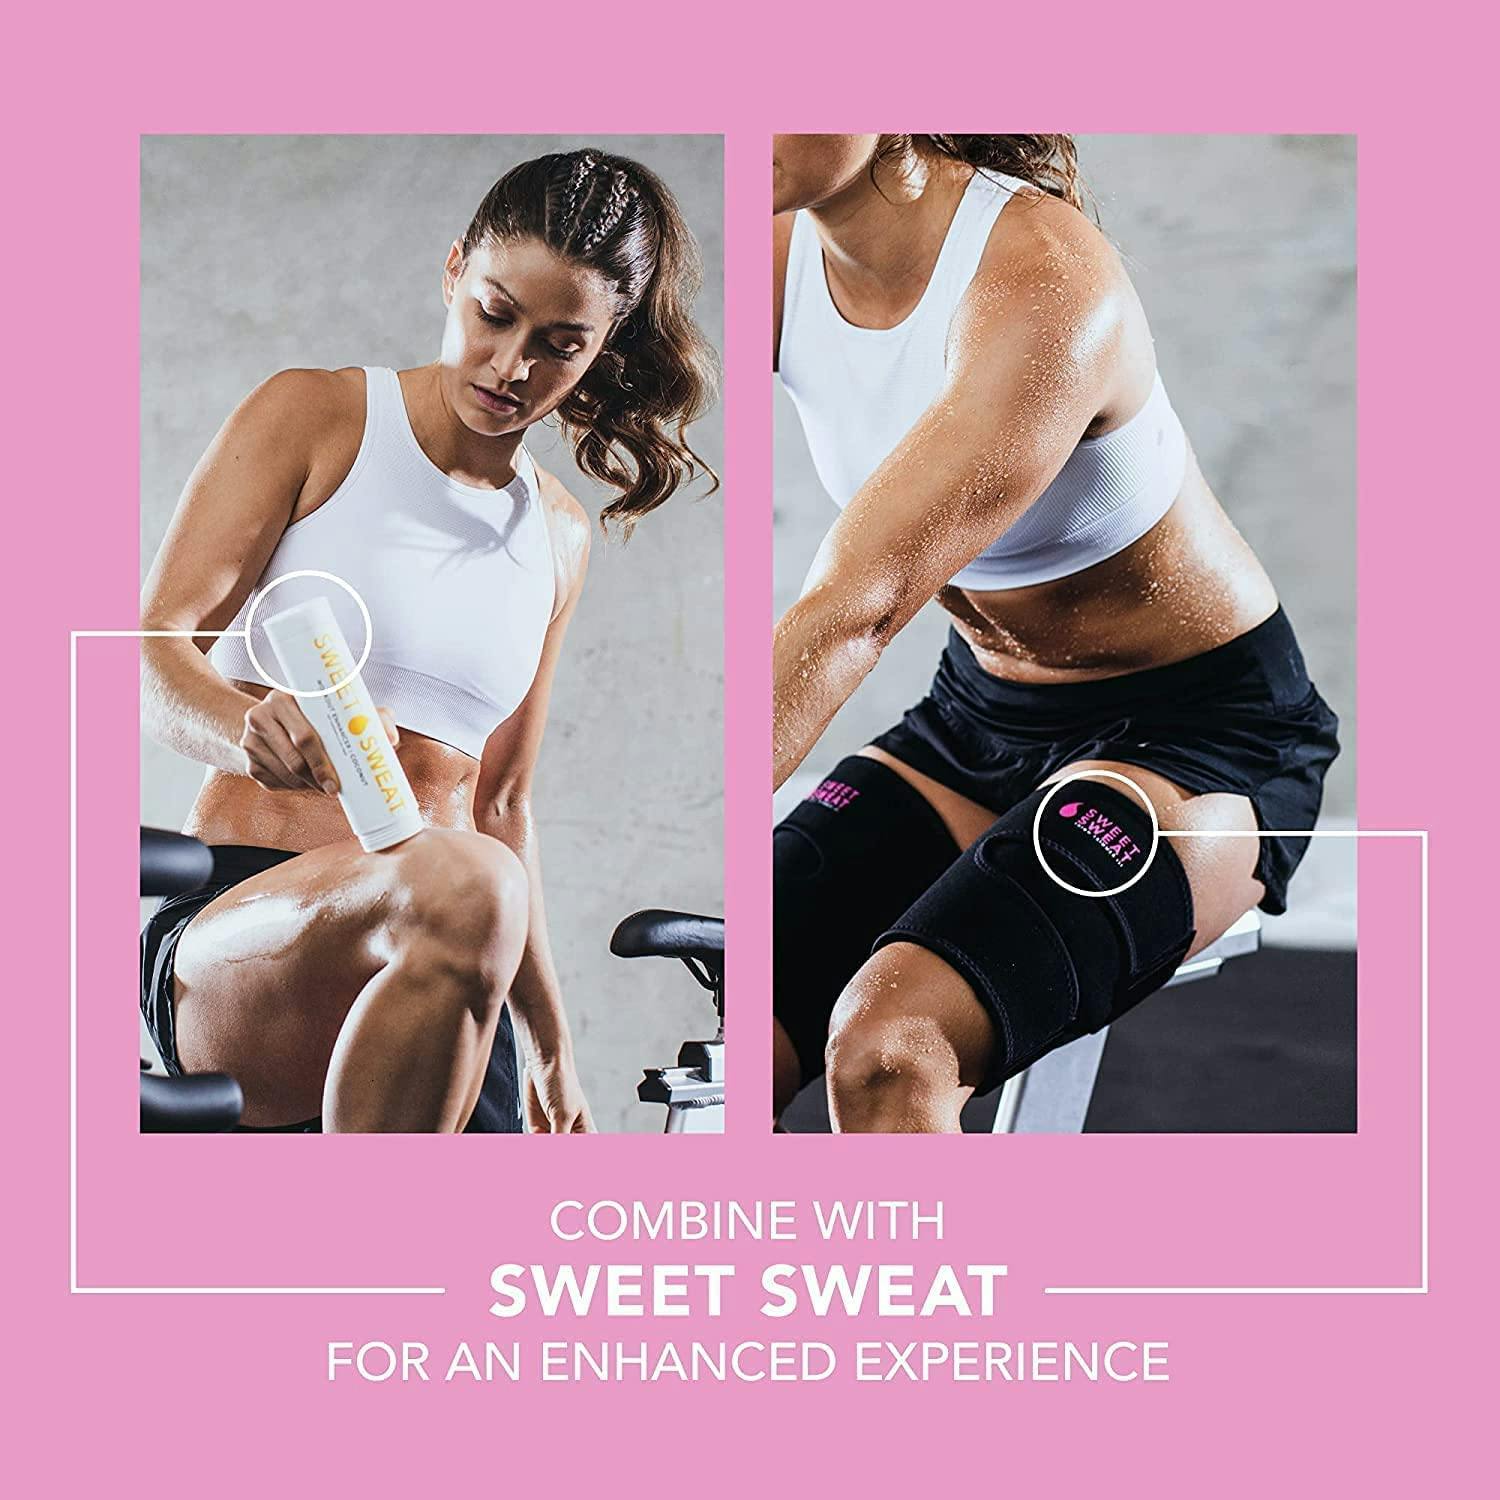 Sweet Sweat® Toned Thigh Trimmer infographic.